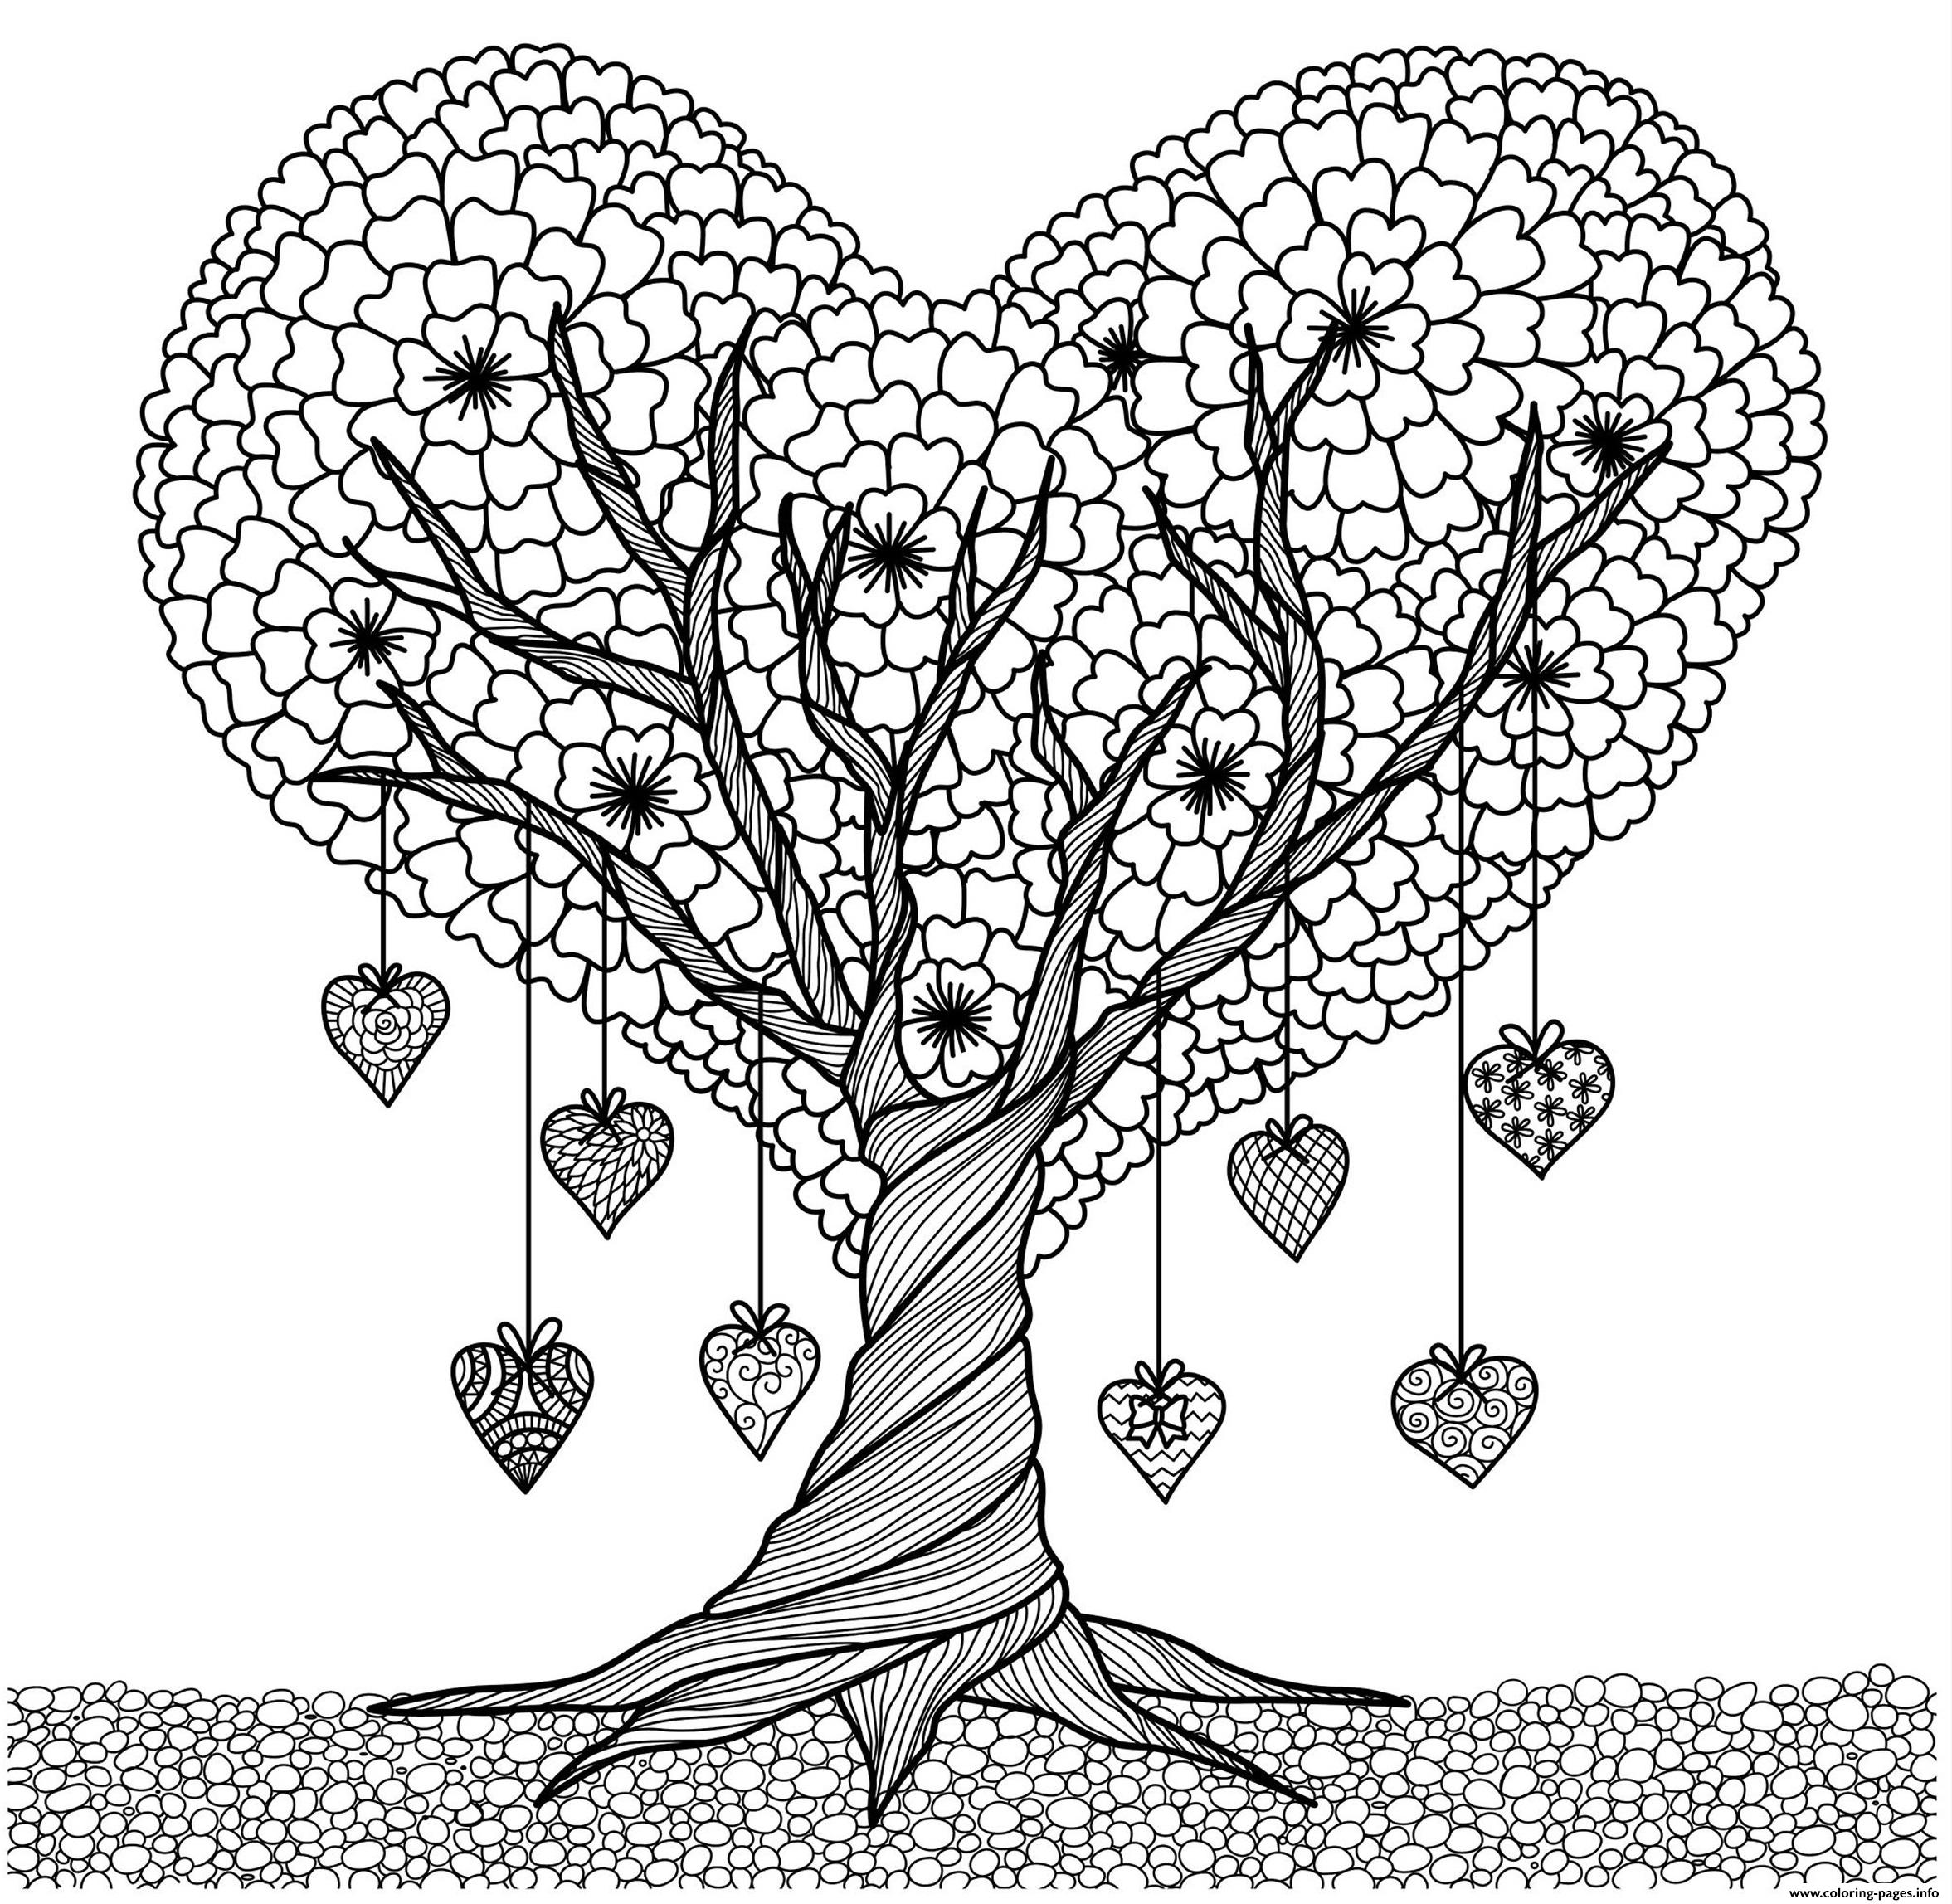 Download Discover Heart Tree Adults Coloring Pages Printable